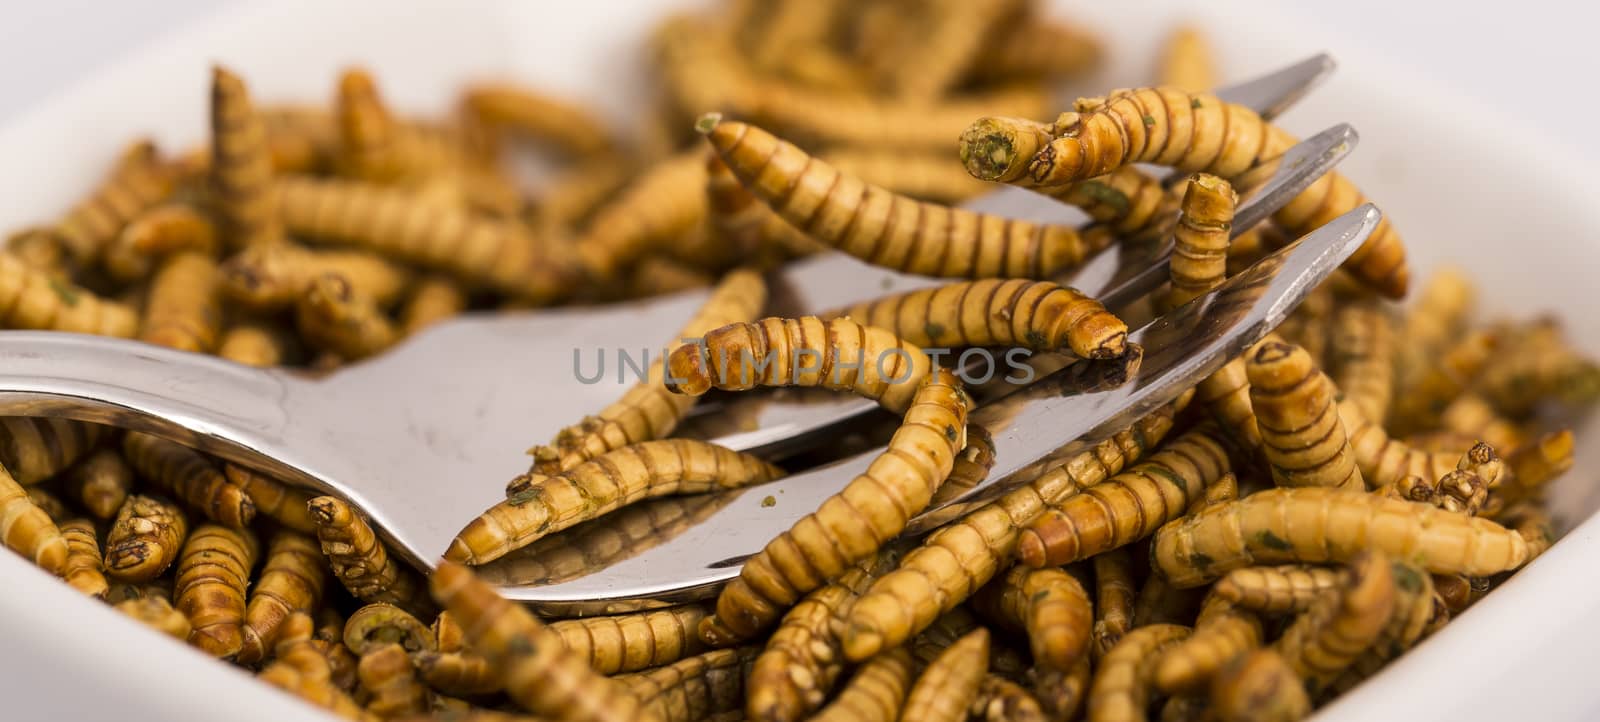 Fried insects, molitors by CatherineL-Prod